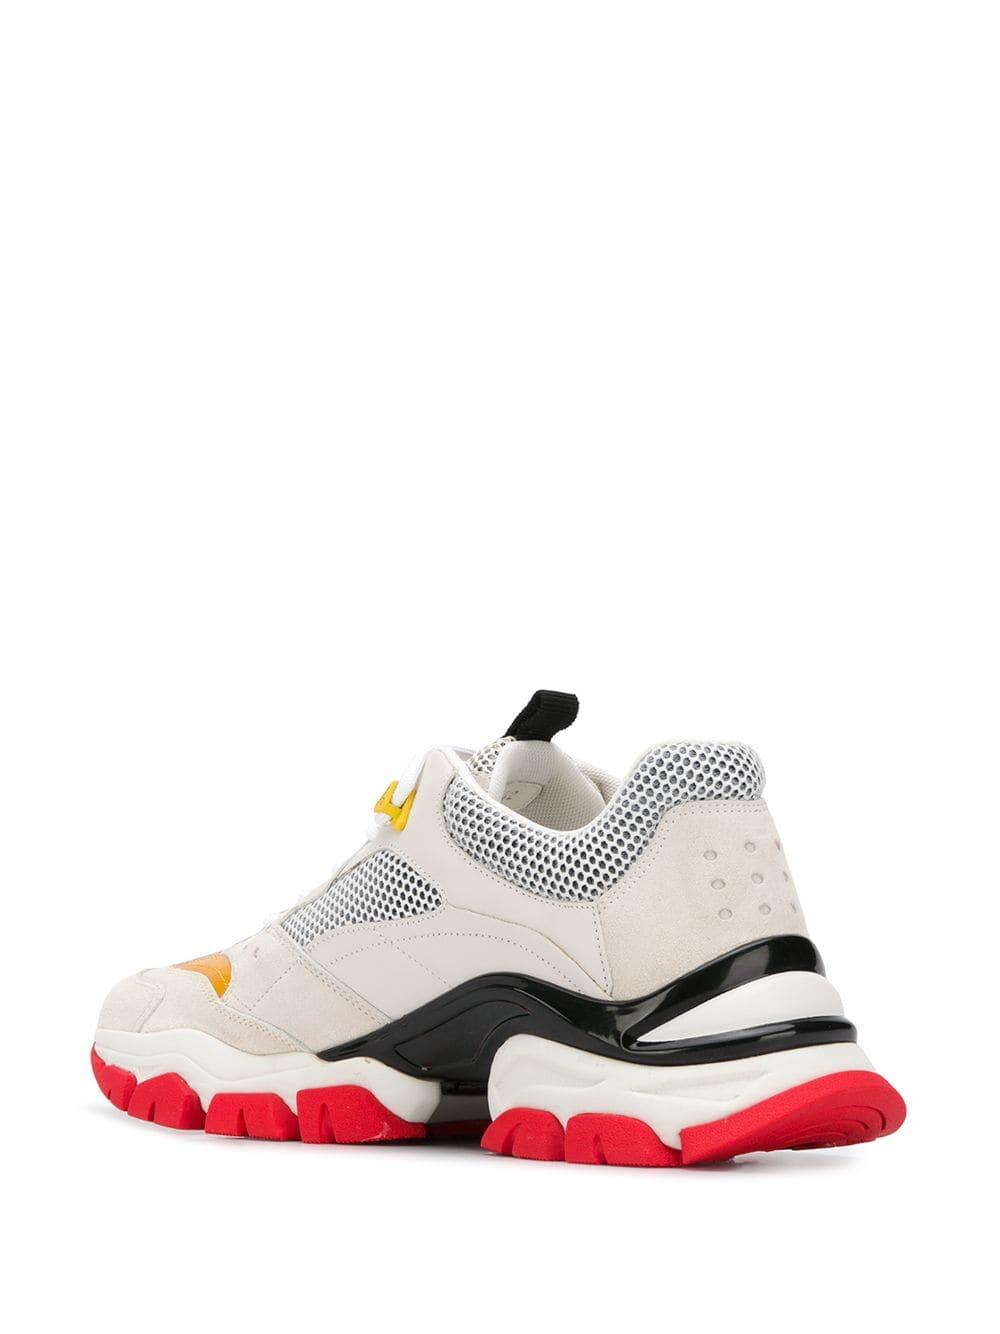 Moncler Leather Leave No Trace Sneakers in White for Men - Lyst